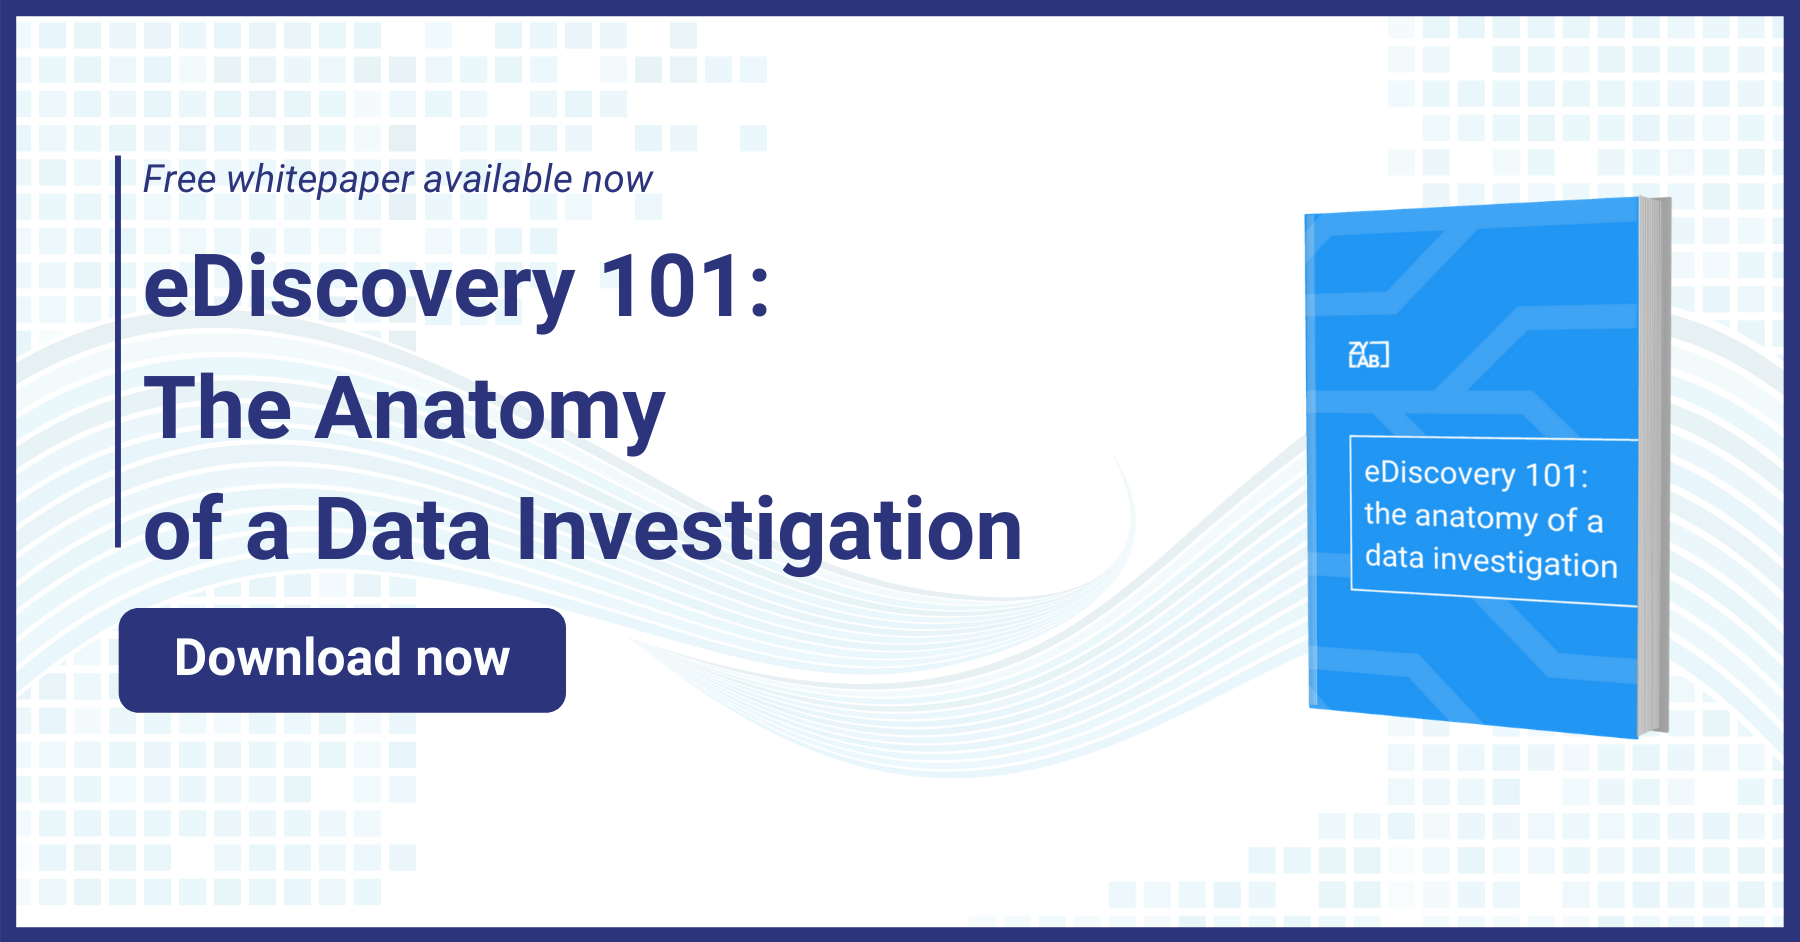 eDiscovery 101 - The Anatomy of a data Investigation